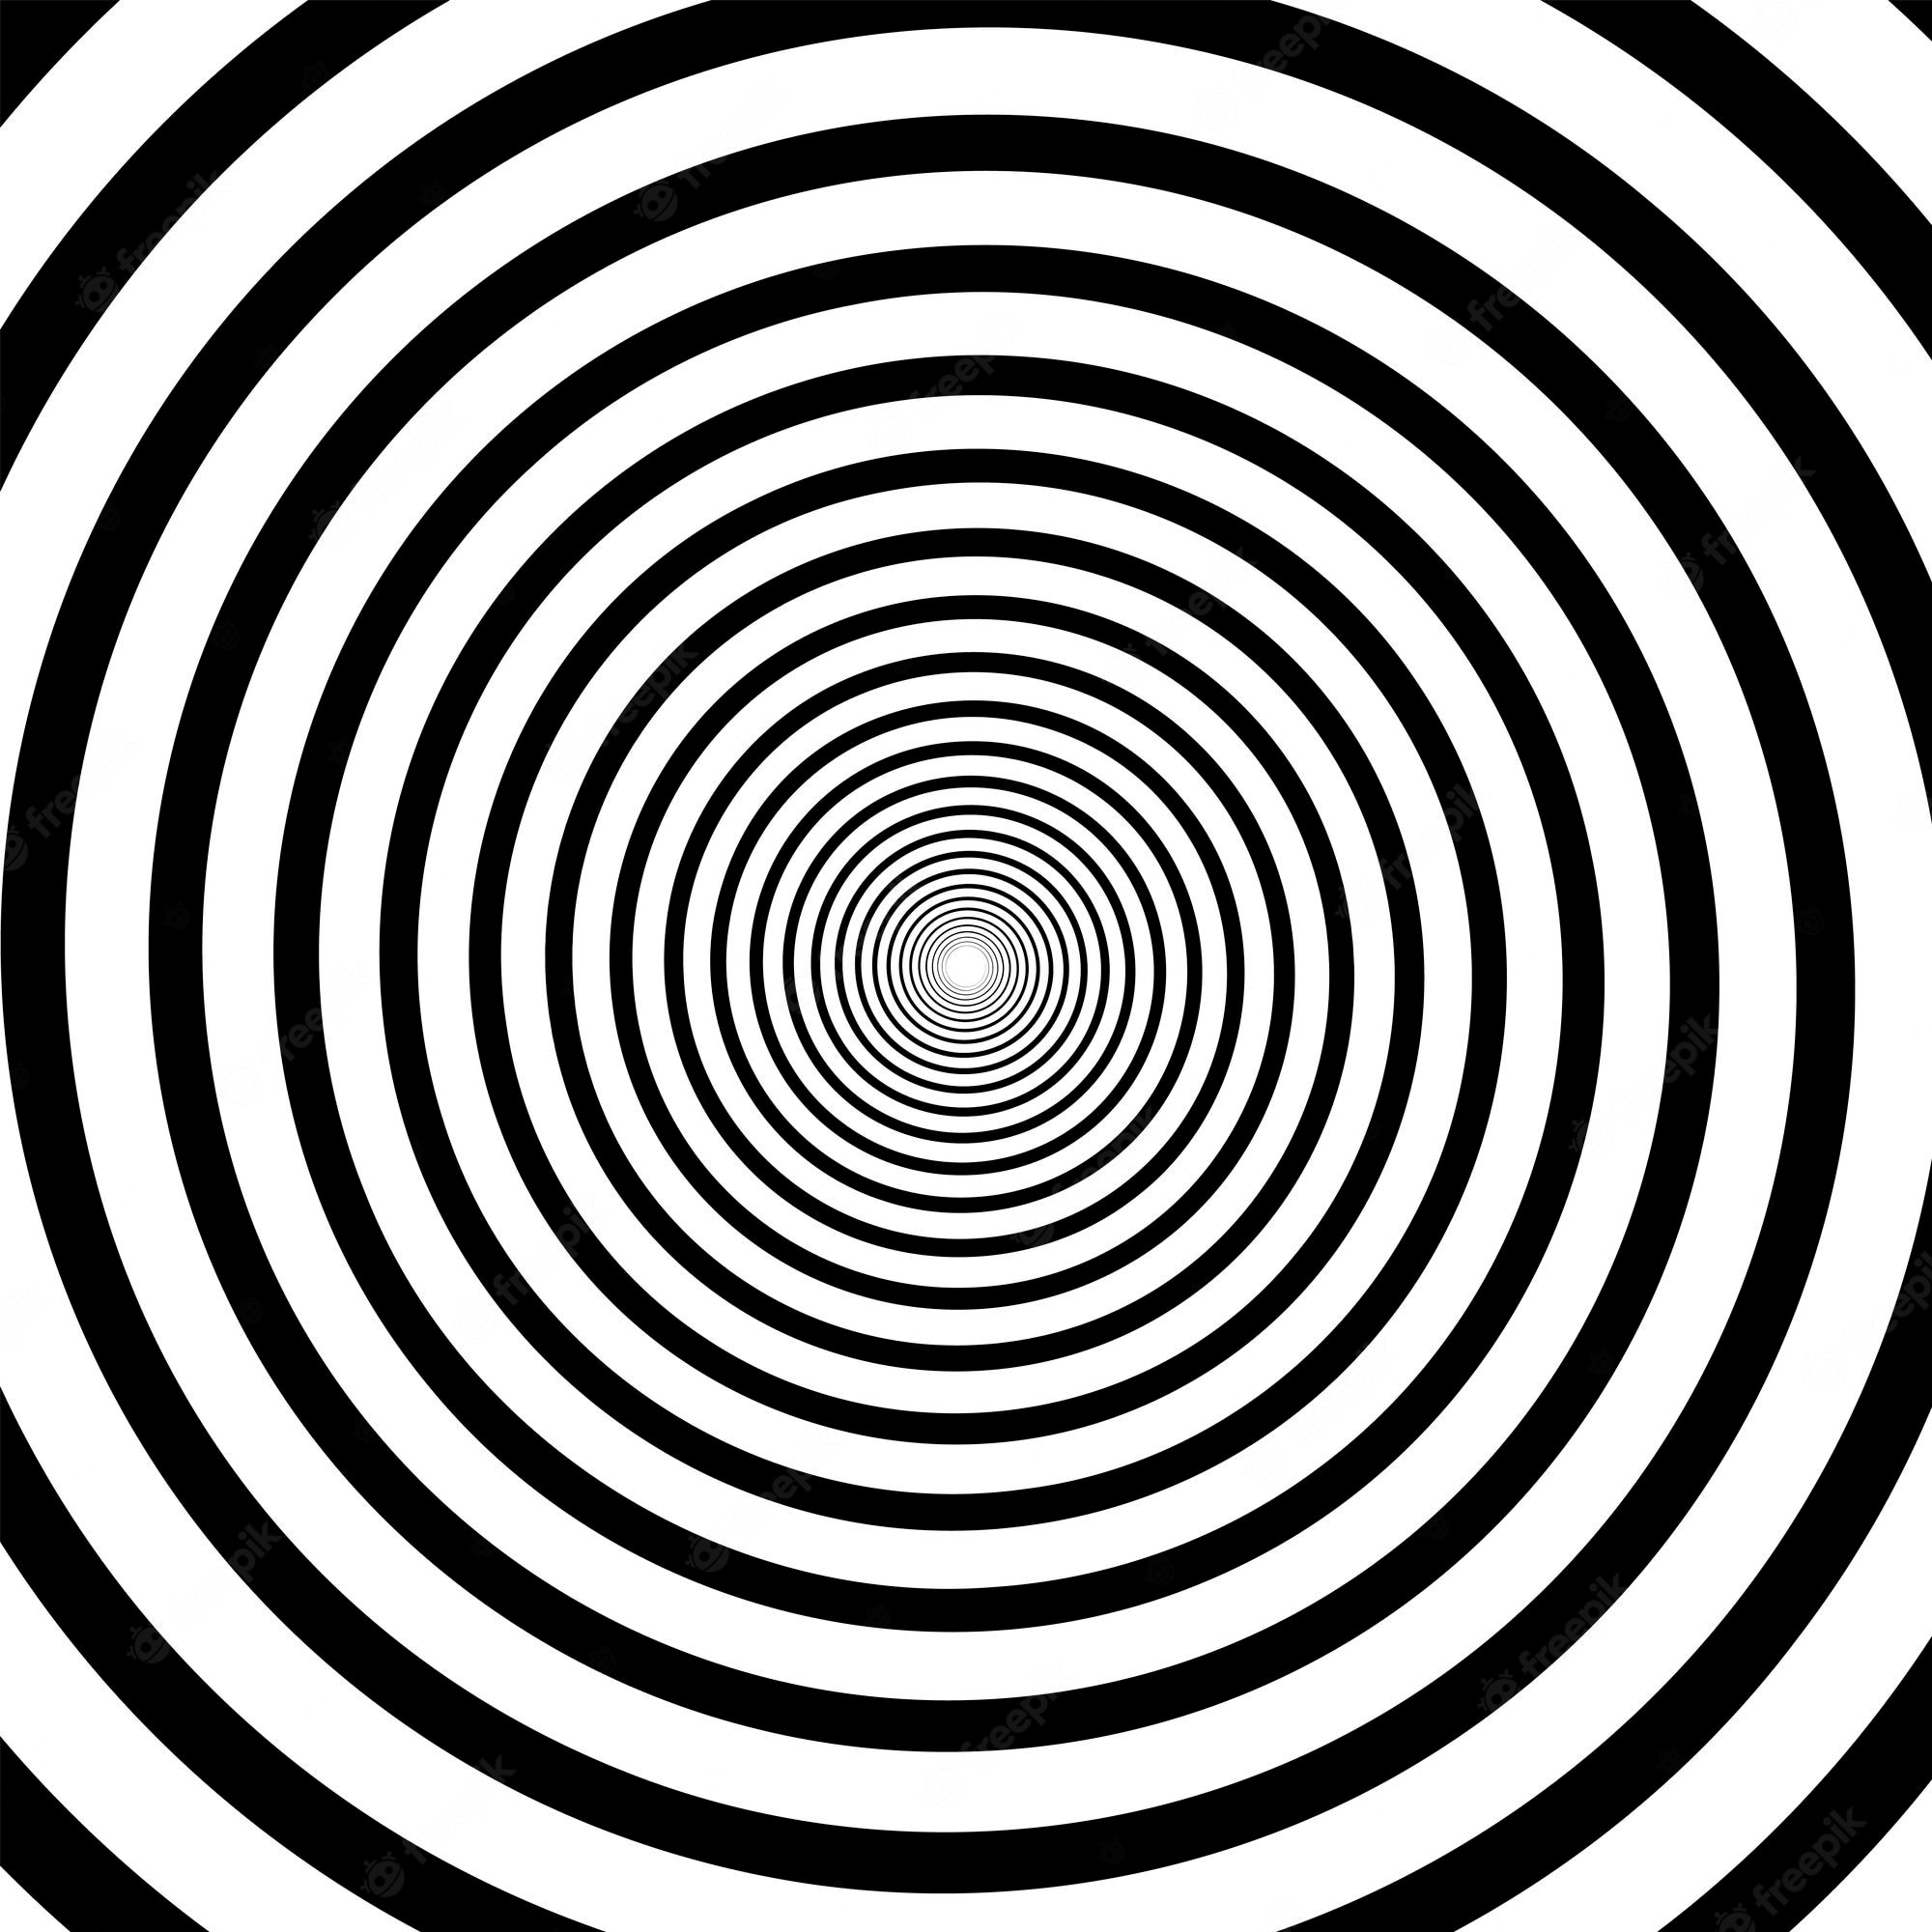 Black And White Spiral Background